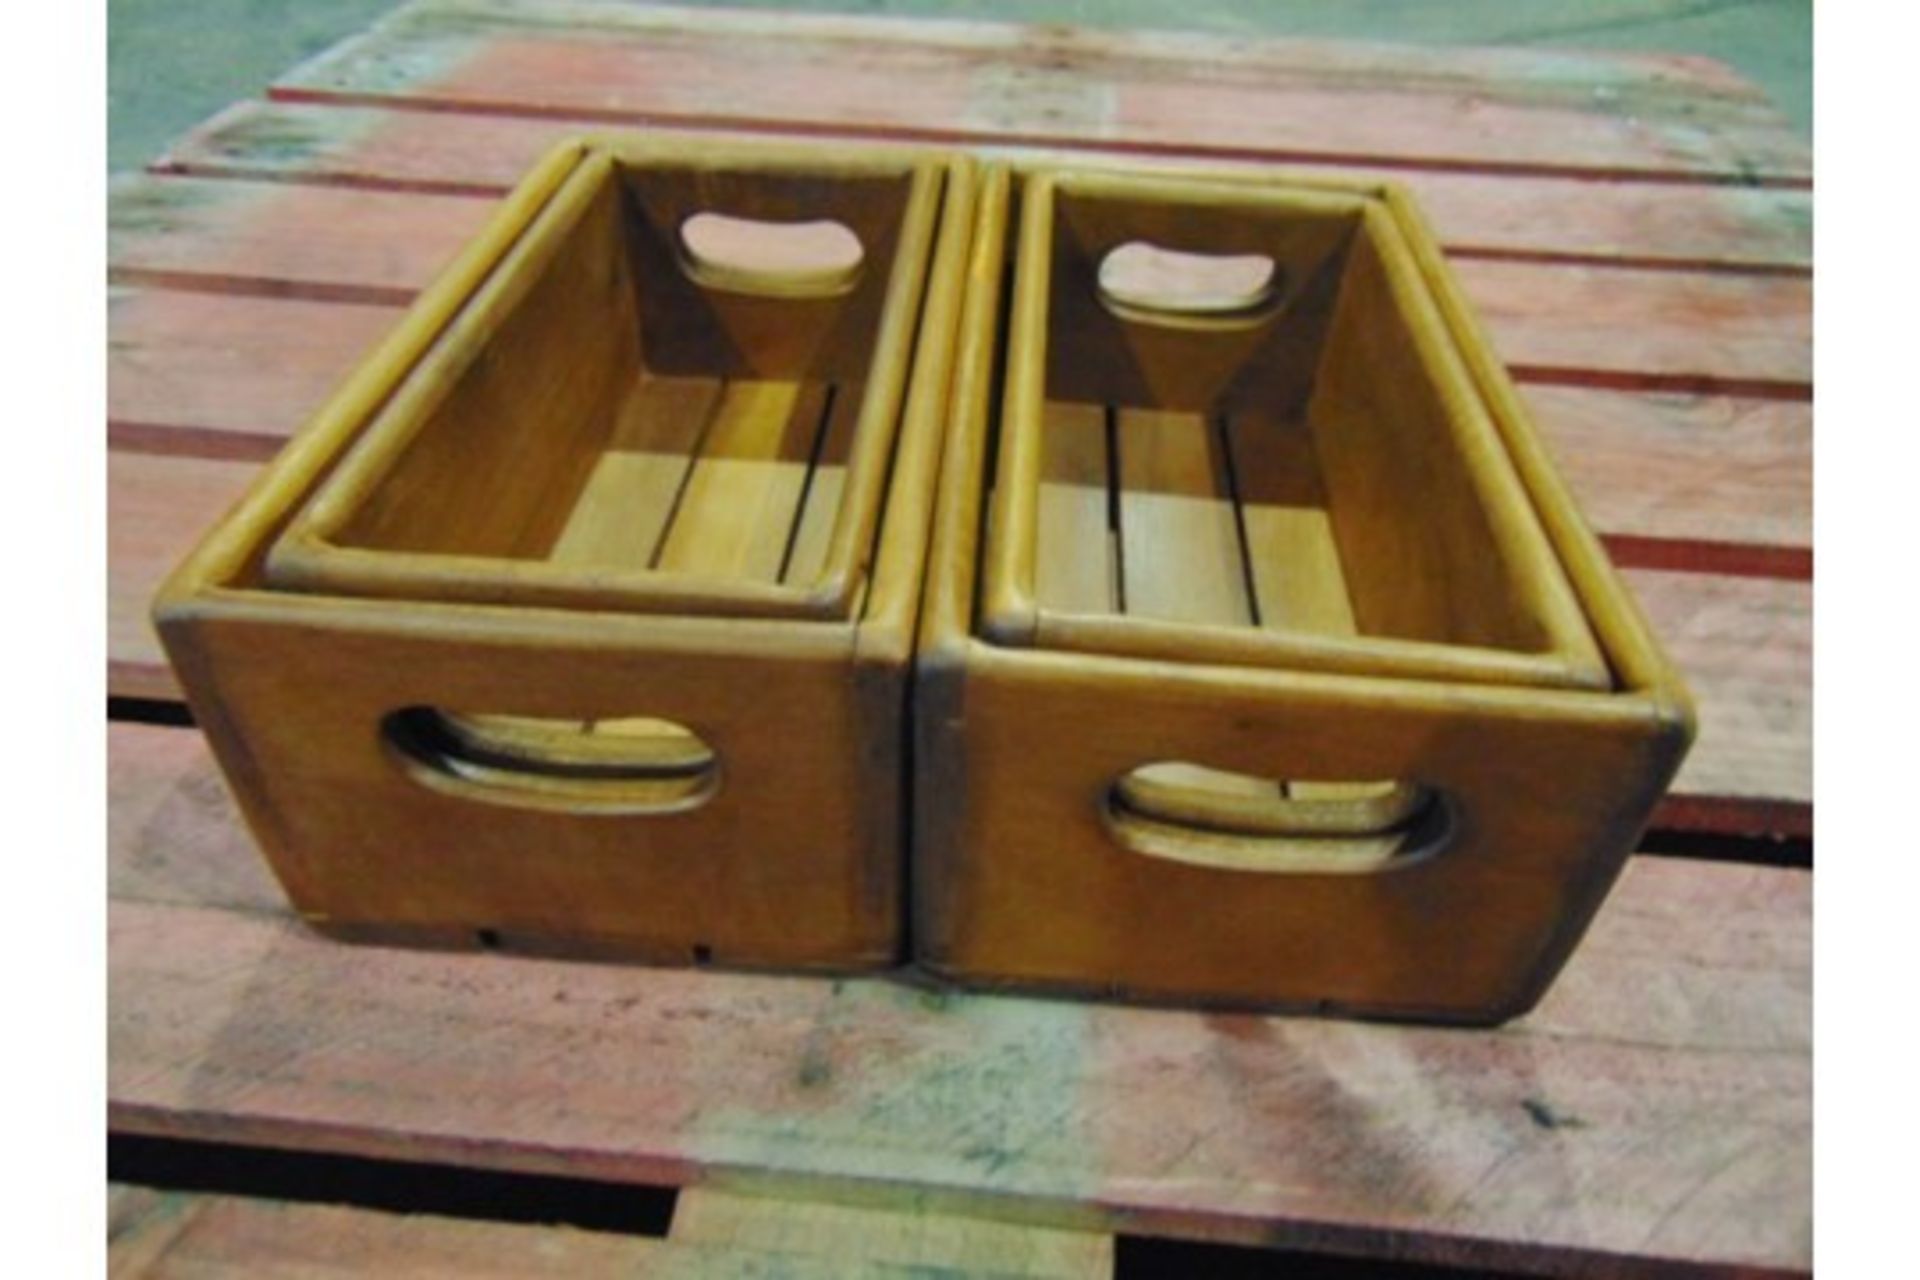 4 x Land Rover Wooden Display / Storage Boxes - Image 5 of 5